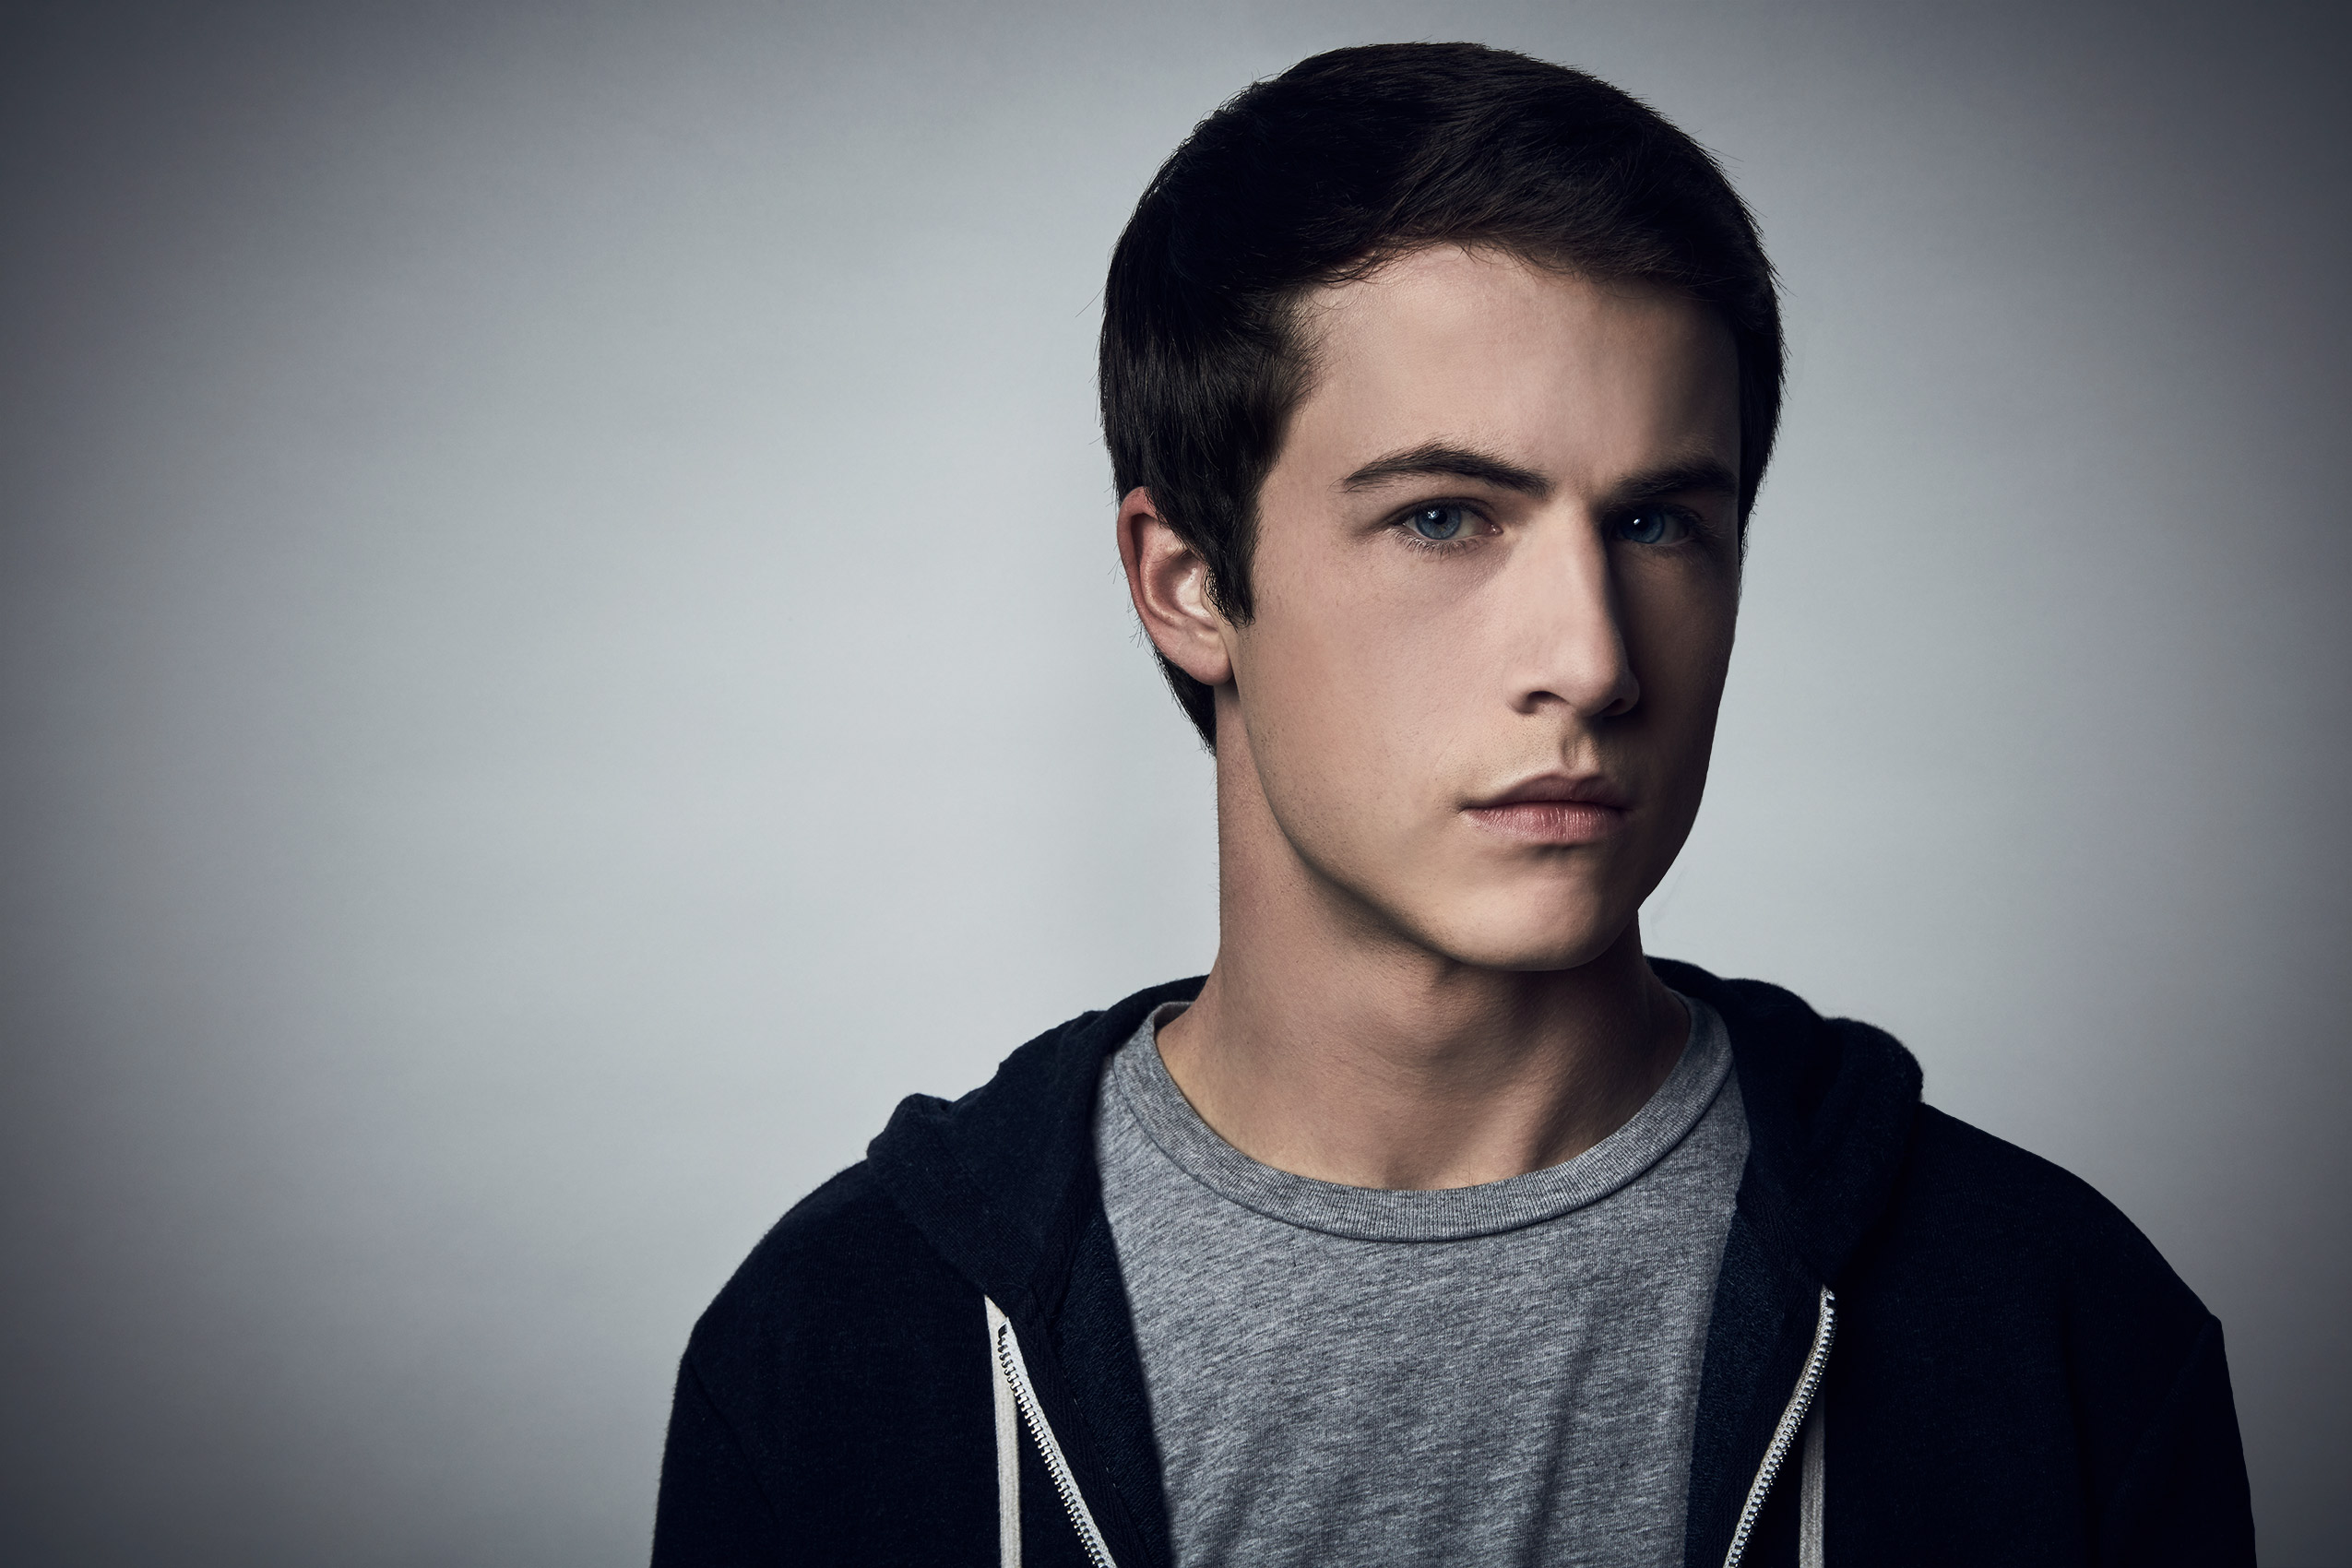 13 REASONS WHY DYLAN MINNETTE